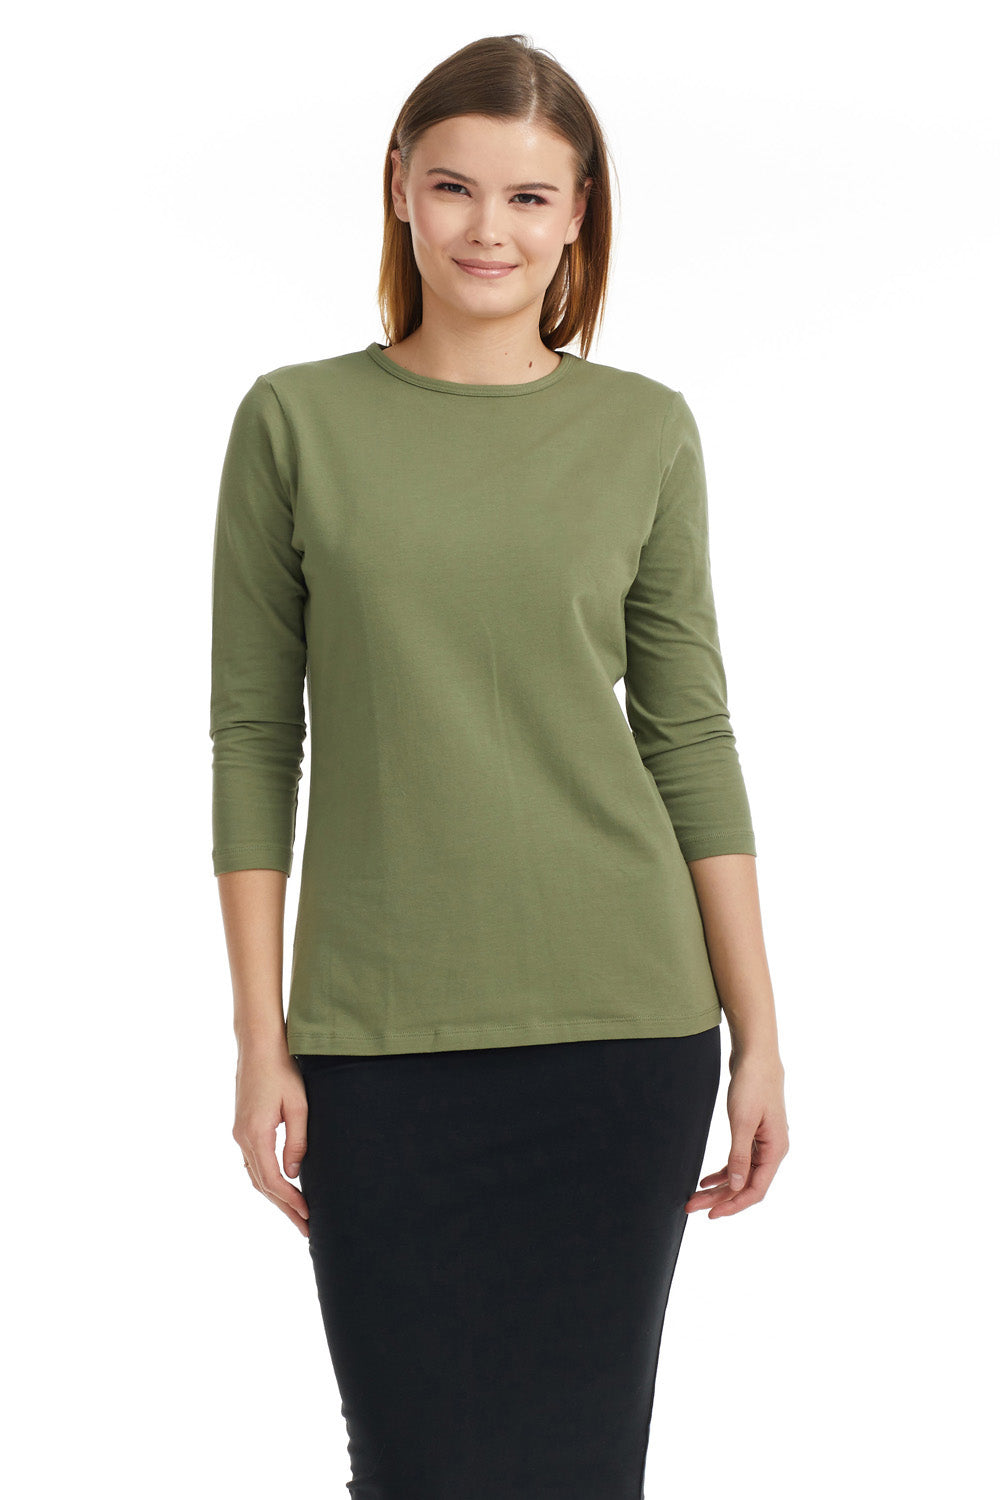 army green stretchy loose fitting cotton layering shirt 